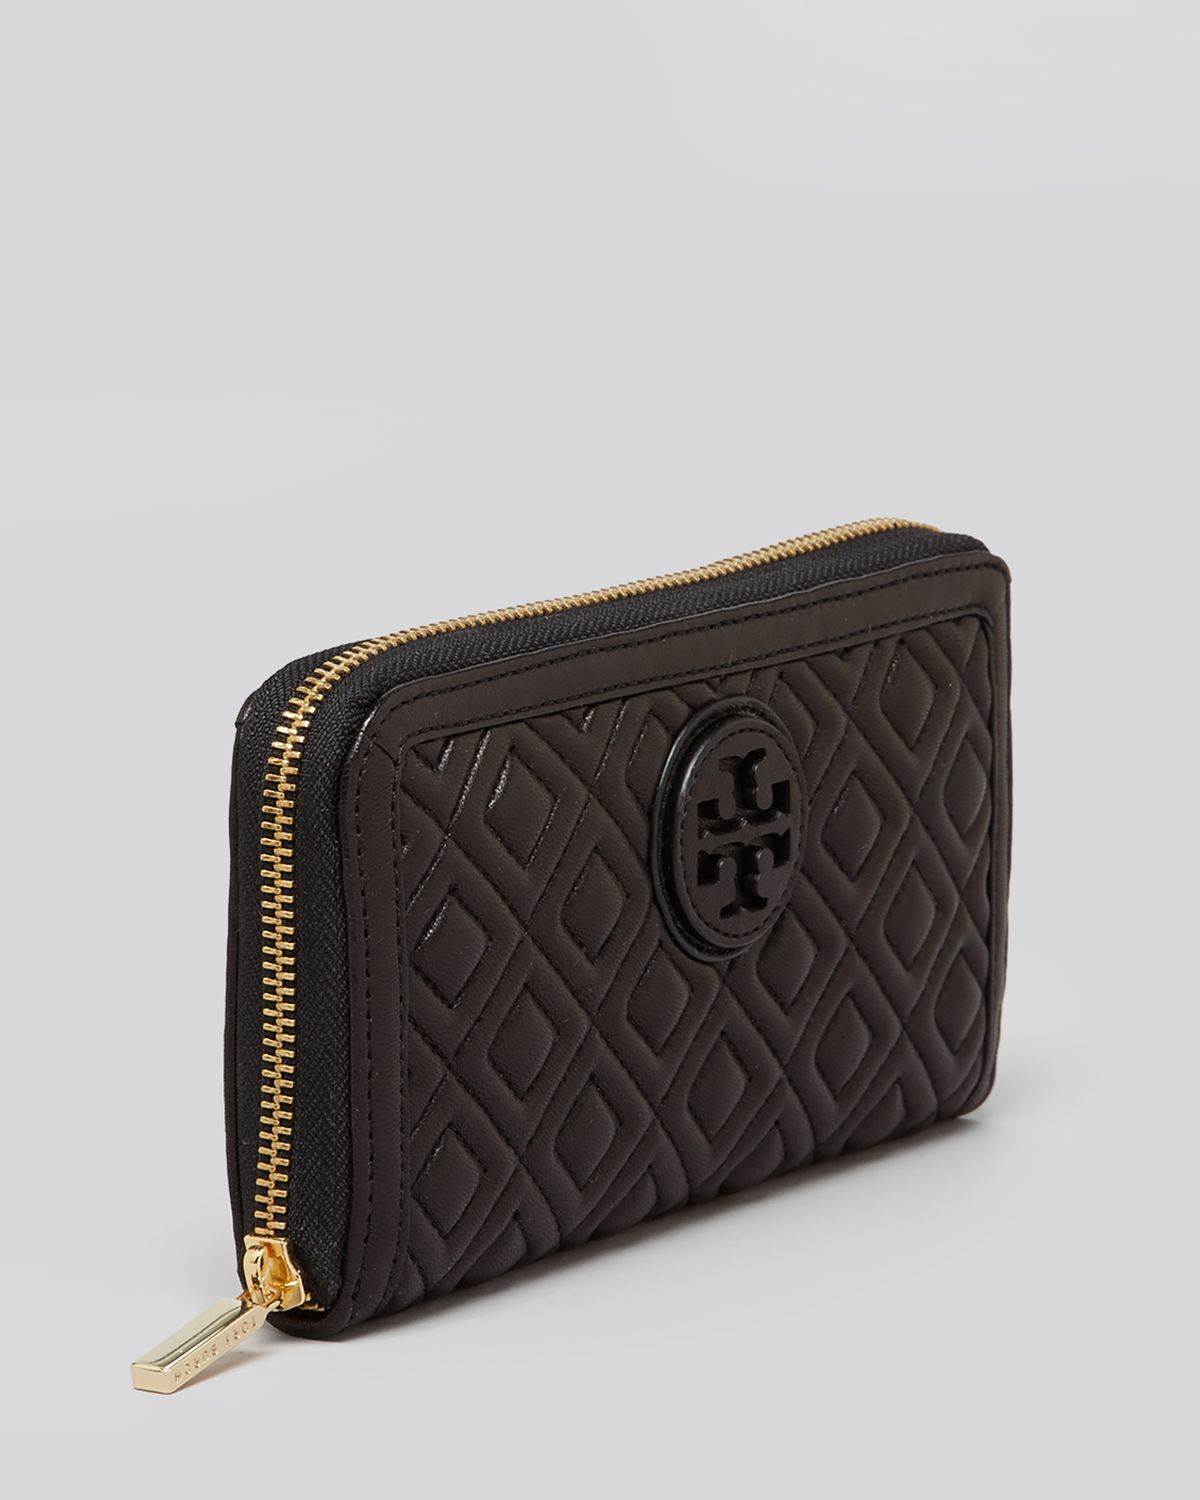 Lyst - Tory Burch Wallet - Marion Zip Continental in Black